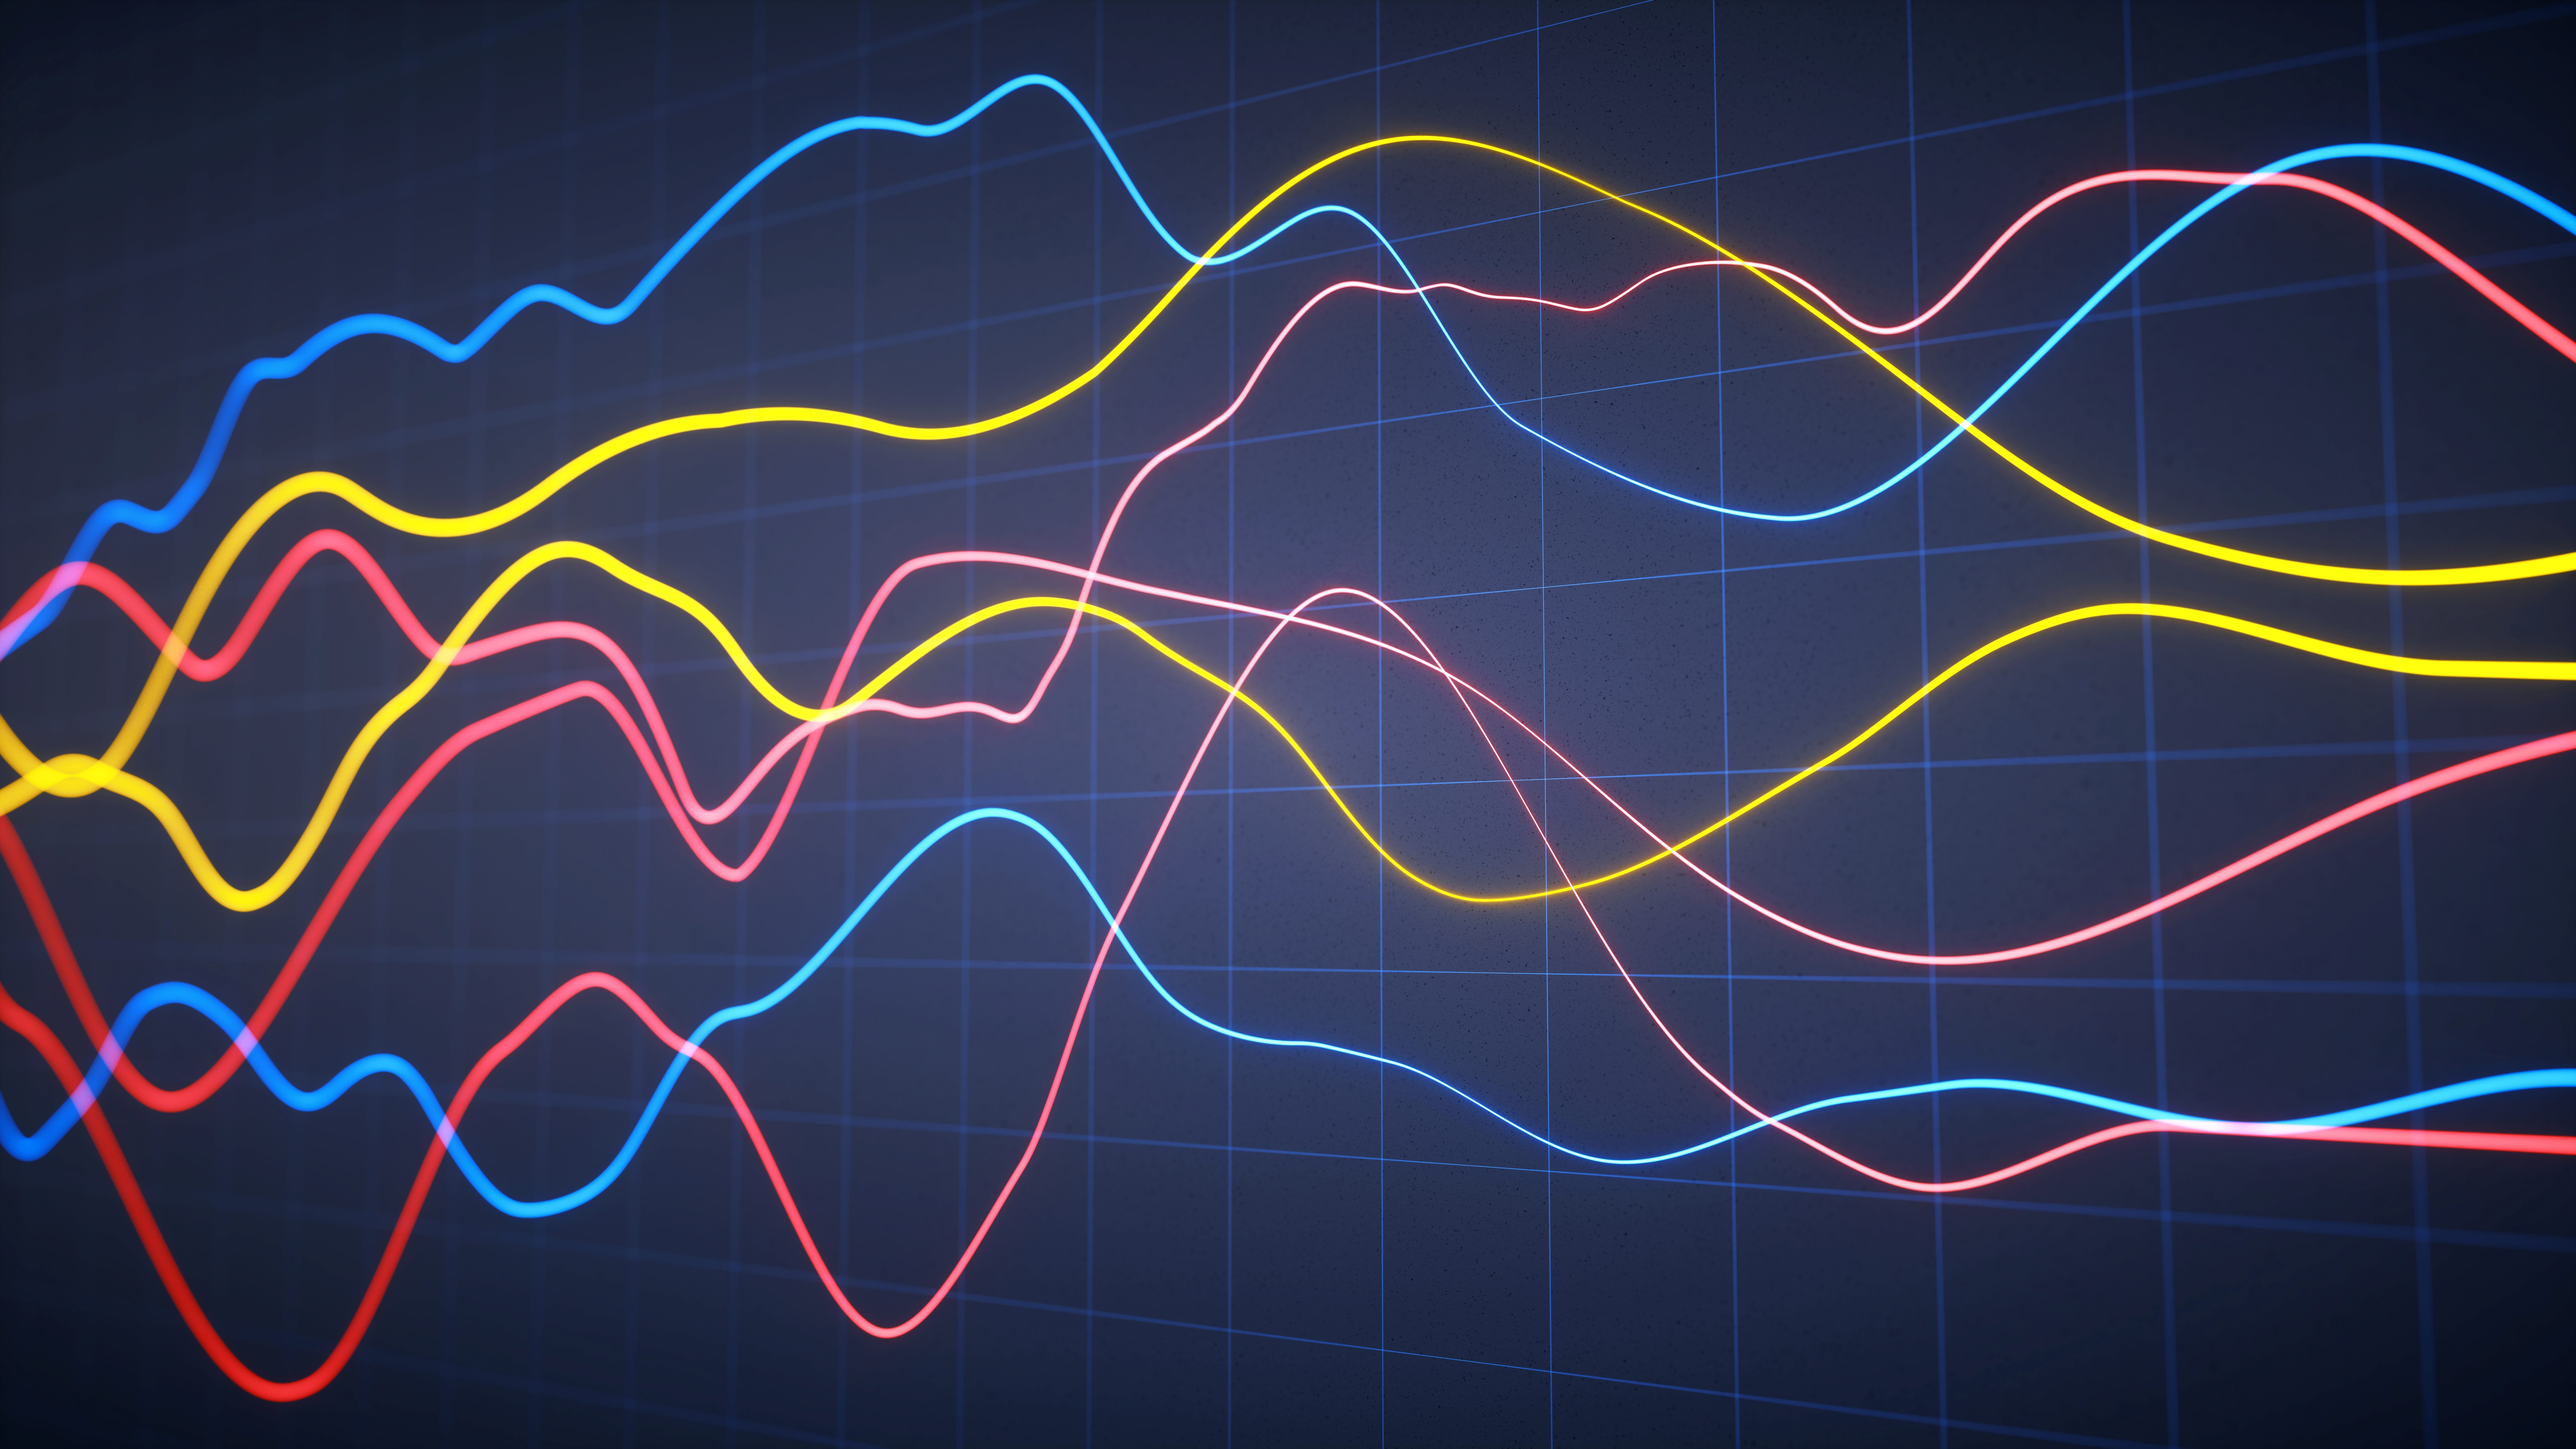 Simple abstract line chart with colorful defocused curves